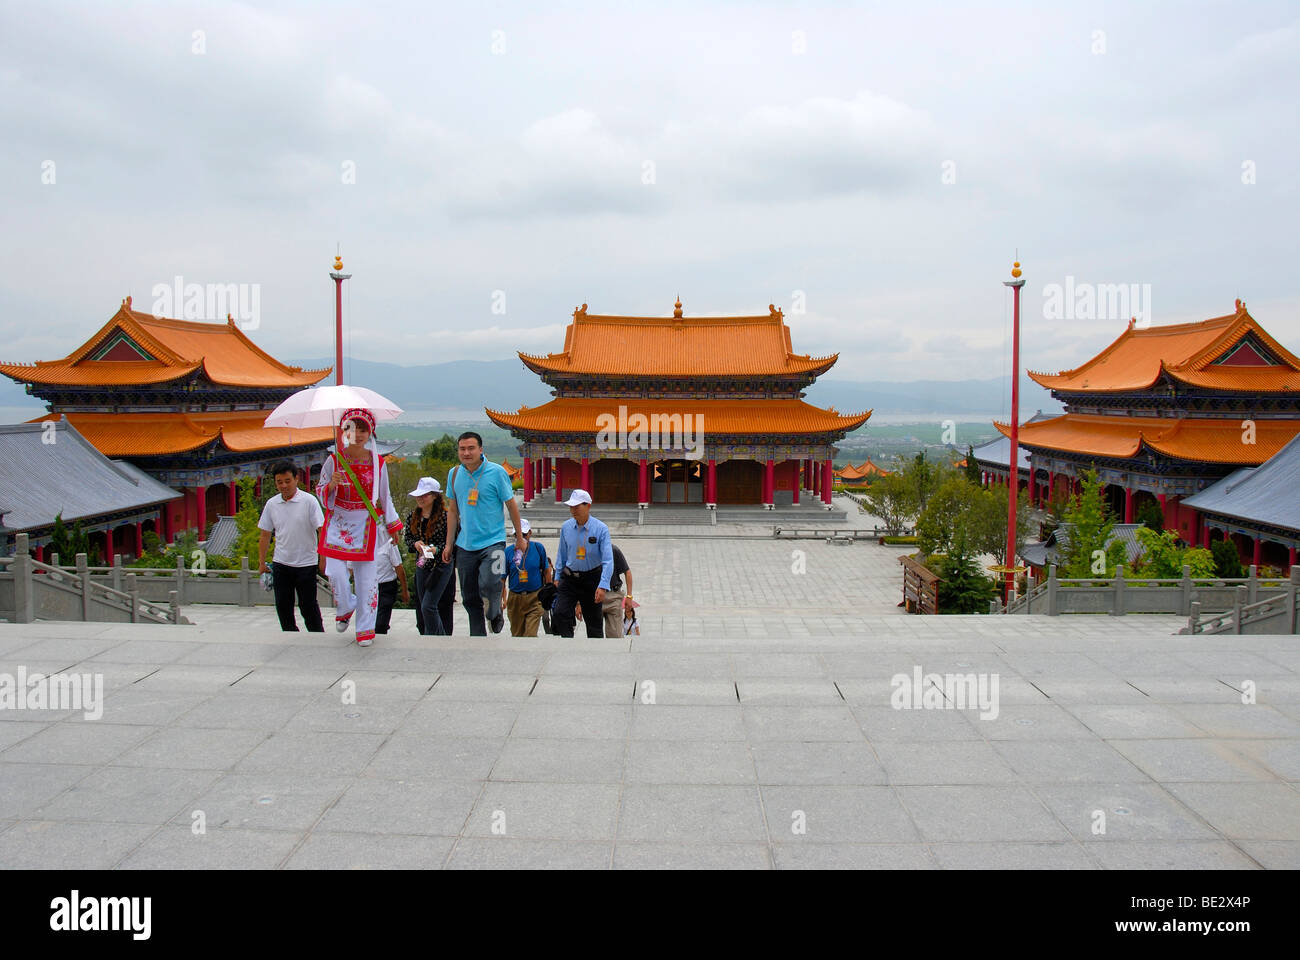 Tourism, guided tour, group of Chinese tourists with guide, Chongsheng Temple, Dali, Yunnan Province, People's Republic of Chin Stock Photo